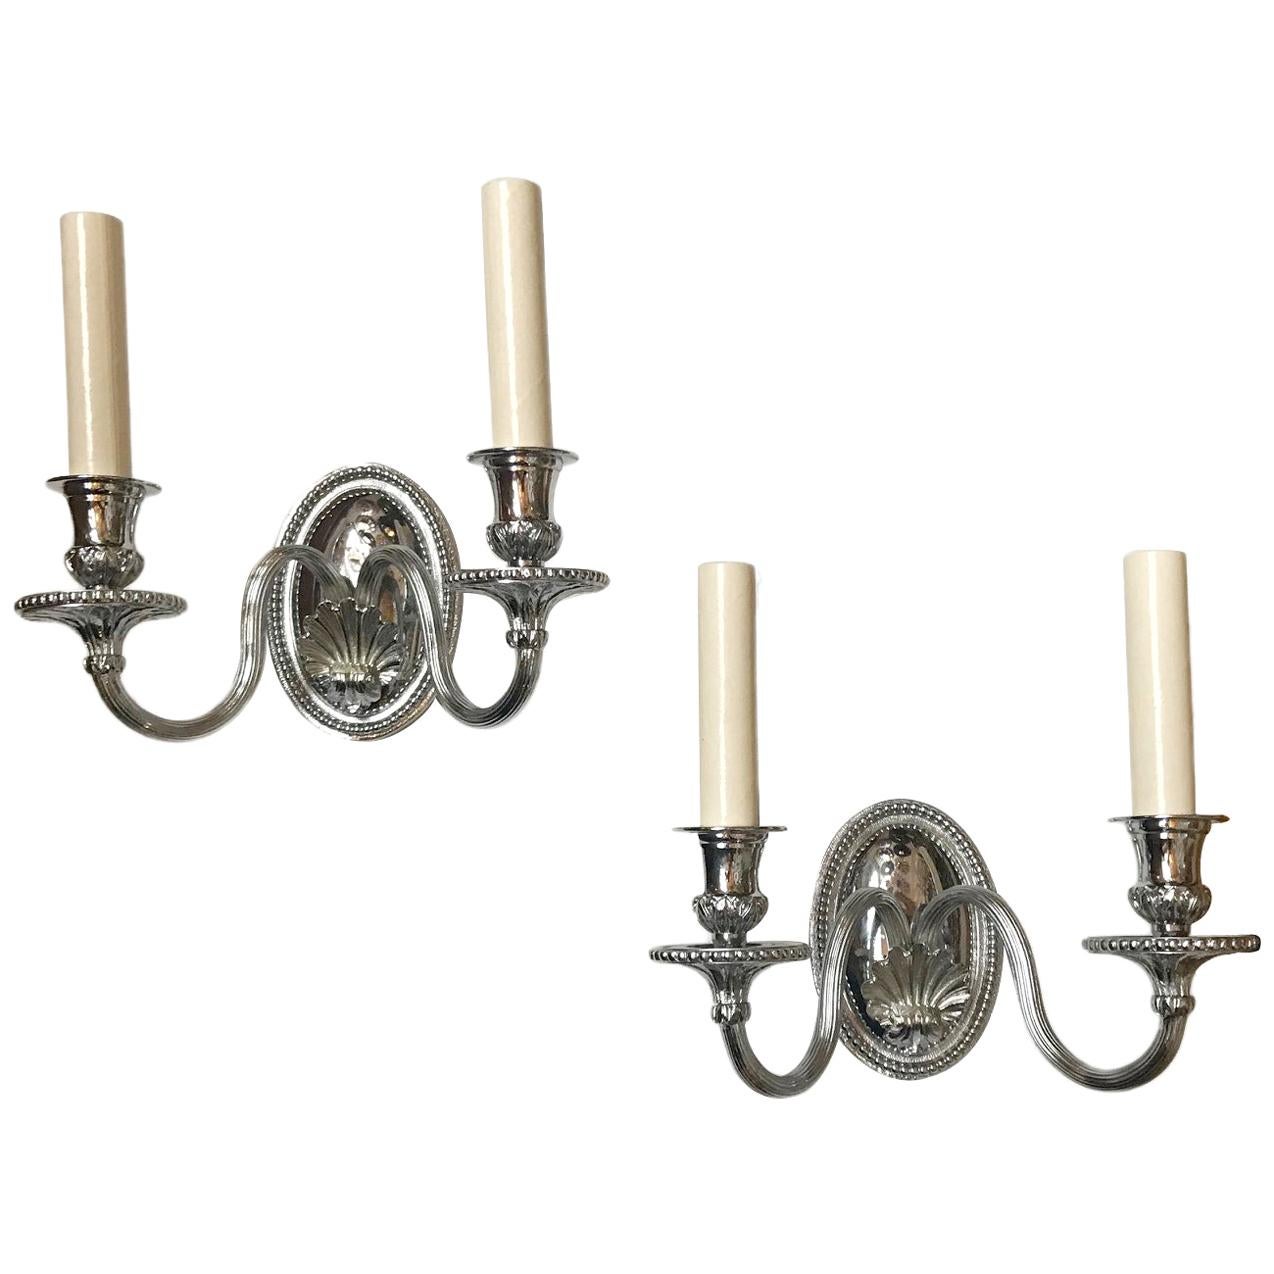 Pair of Nickel-Plated Neoclassic Sconces For Sale